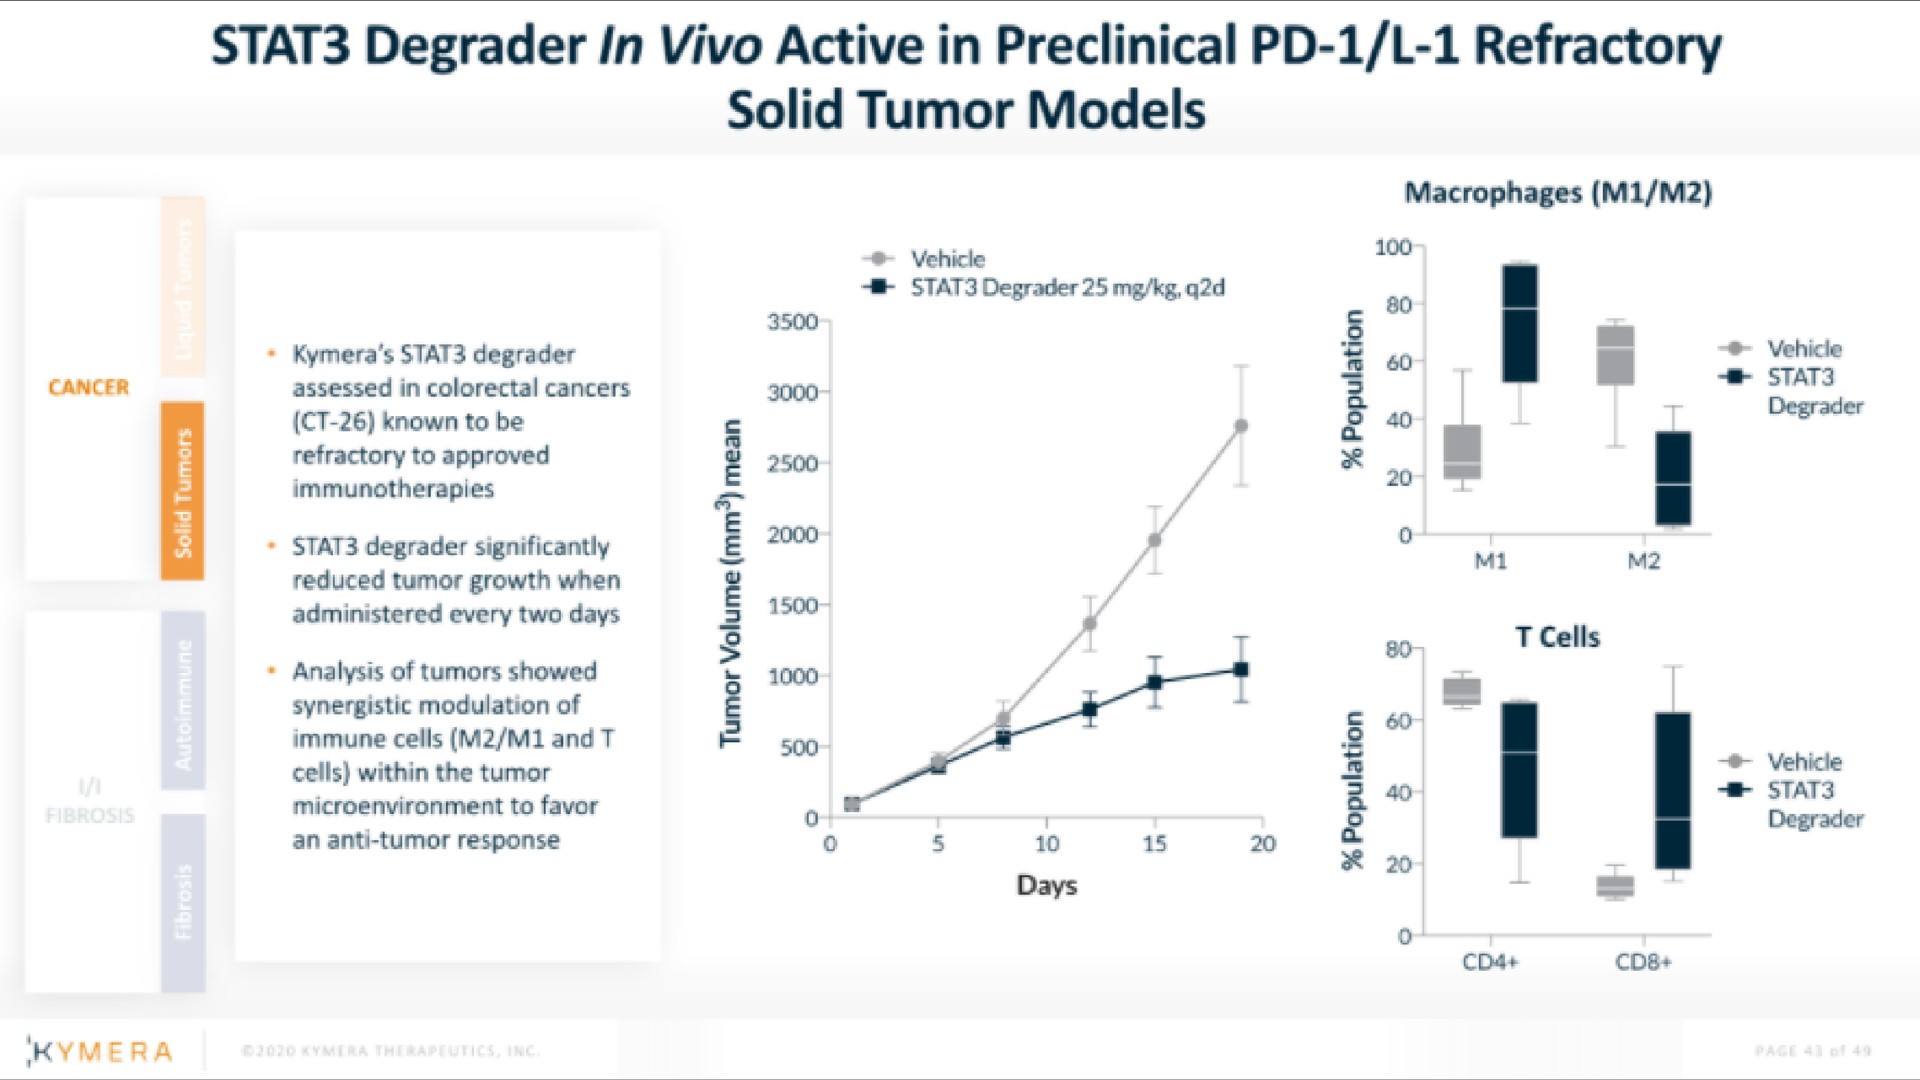 degrader active in preclinical refractory | Kymera